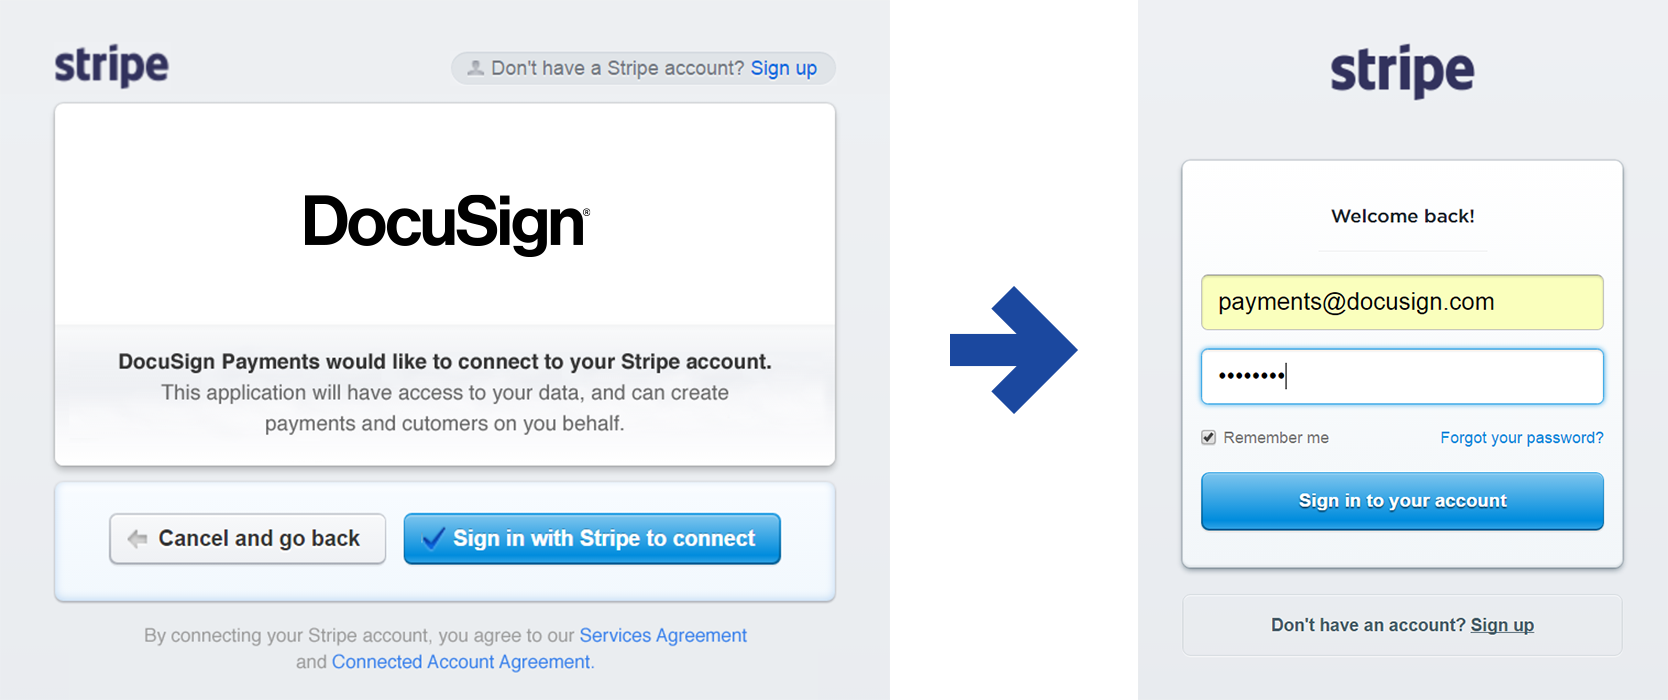 Connect to your Stripe account